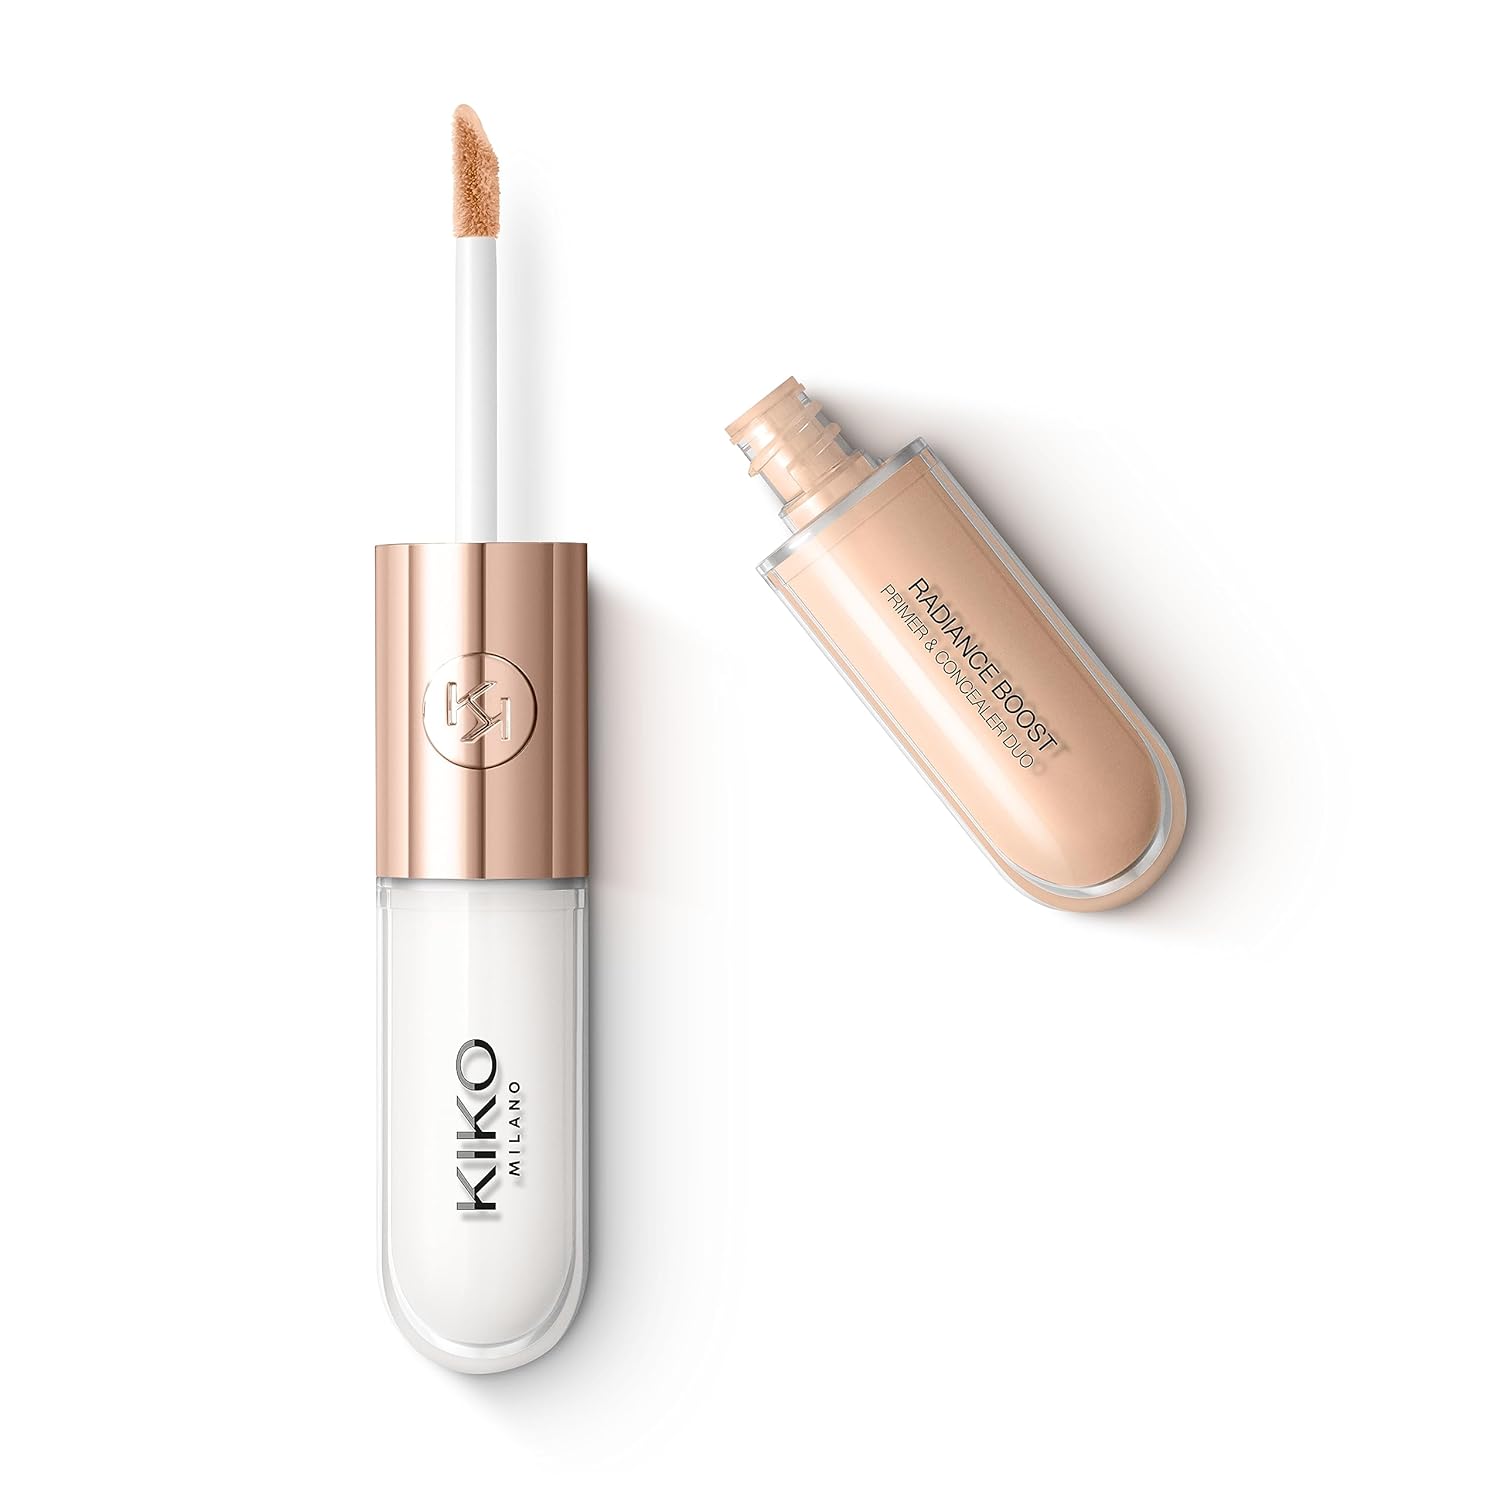 Kiko Milano Radiance Boost Primer & Concealer Duo 04 | Primer and concealer duo for the eyes